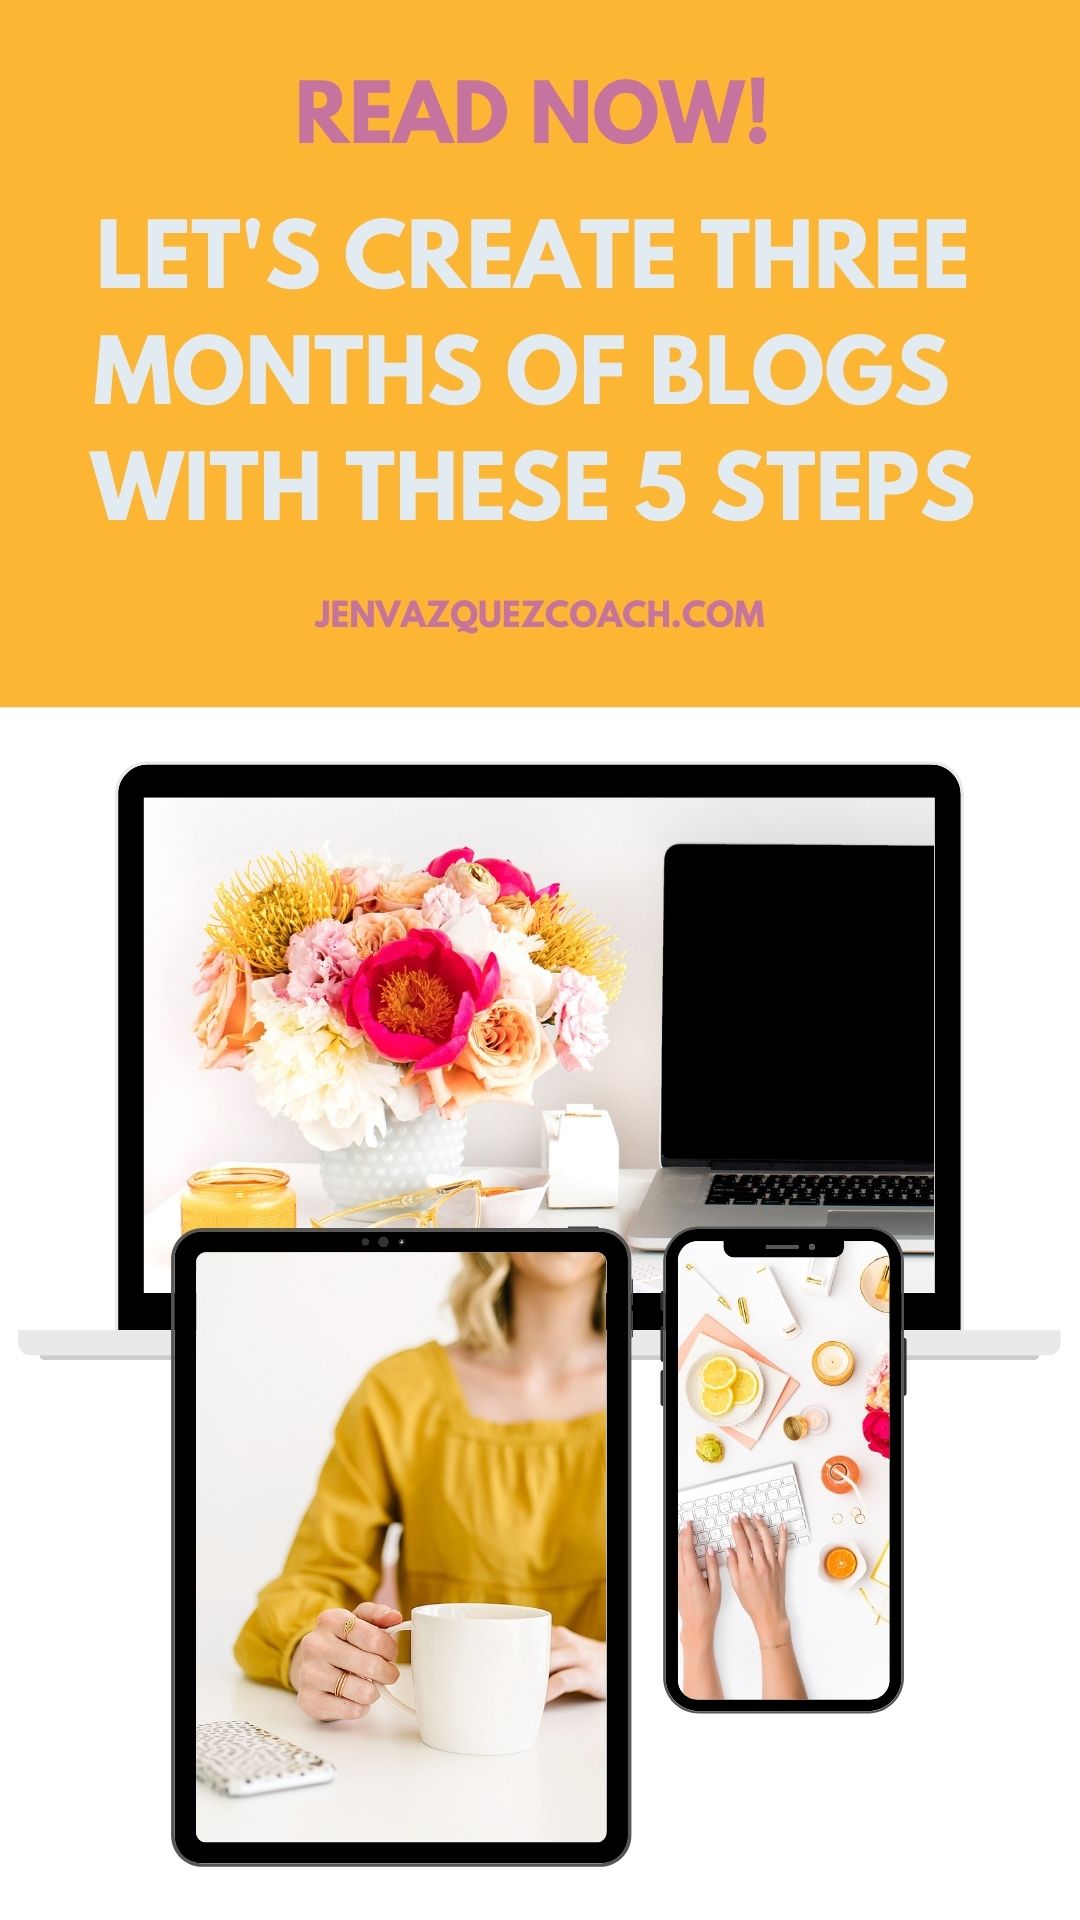 Let's Create Three Months of Blogs in 5 Steps